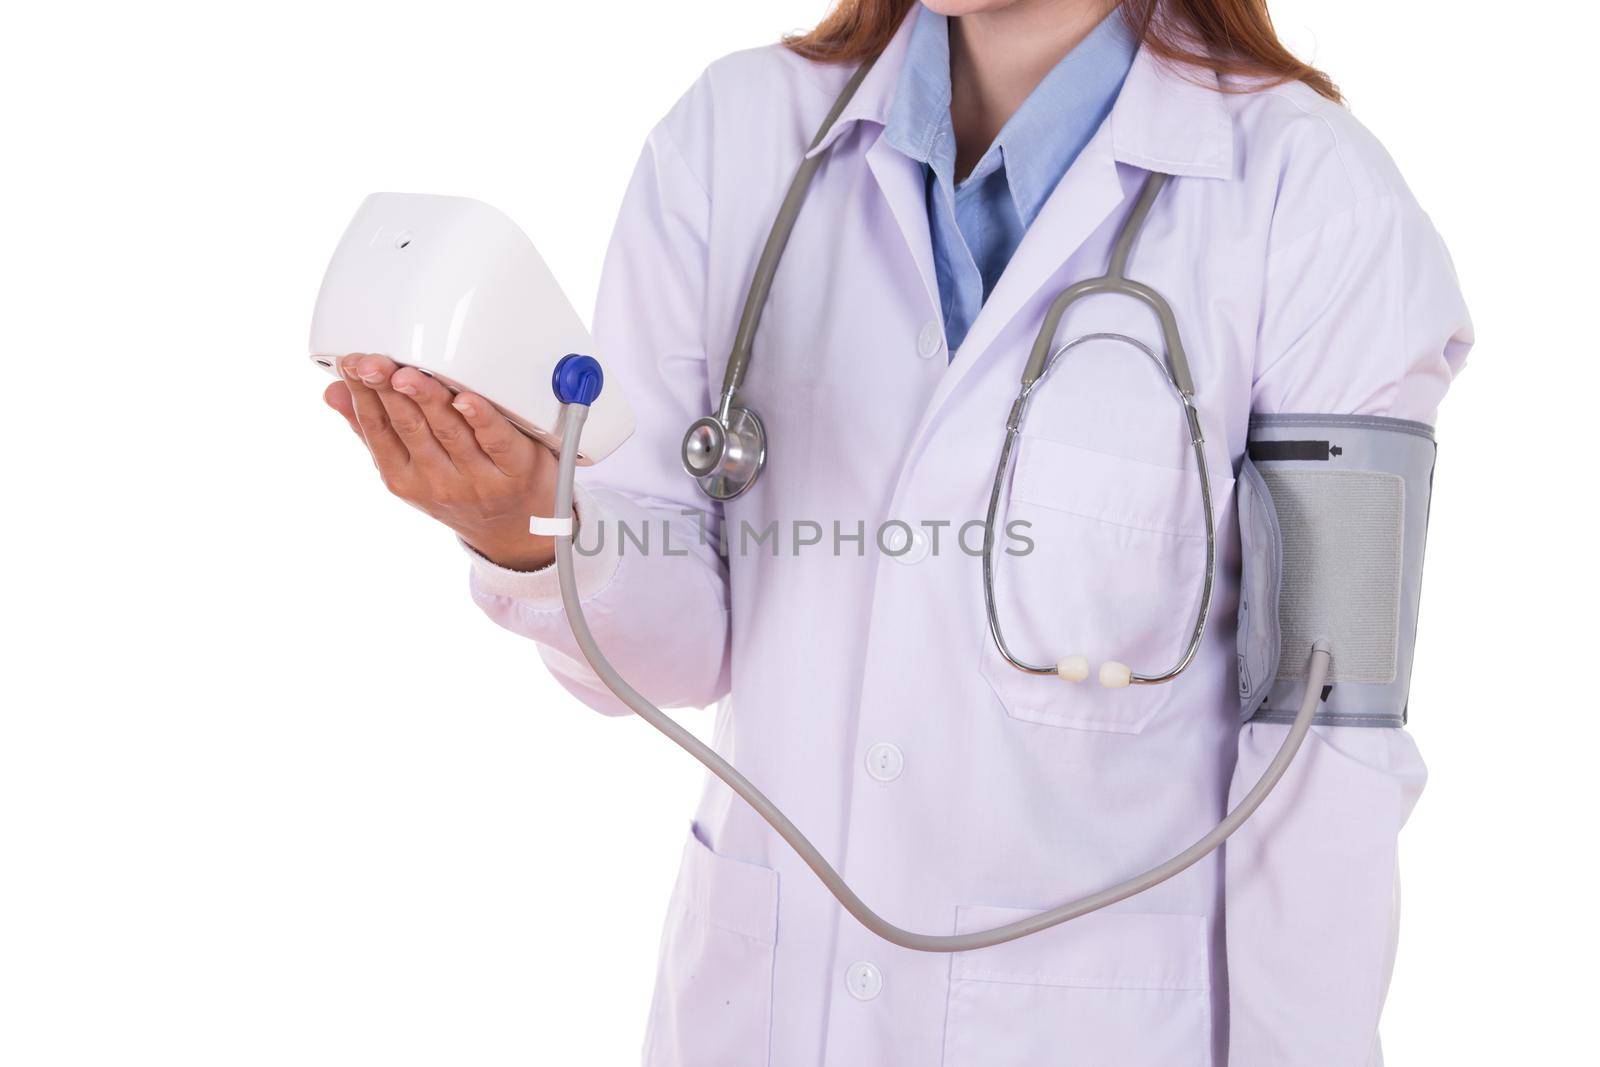 close-up hearth beat monitor and blood pressure with female doctor isolated on white background